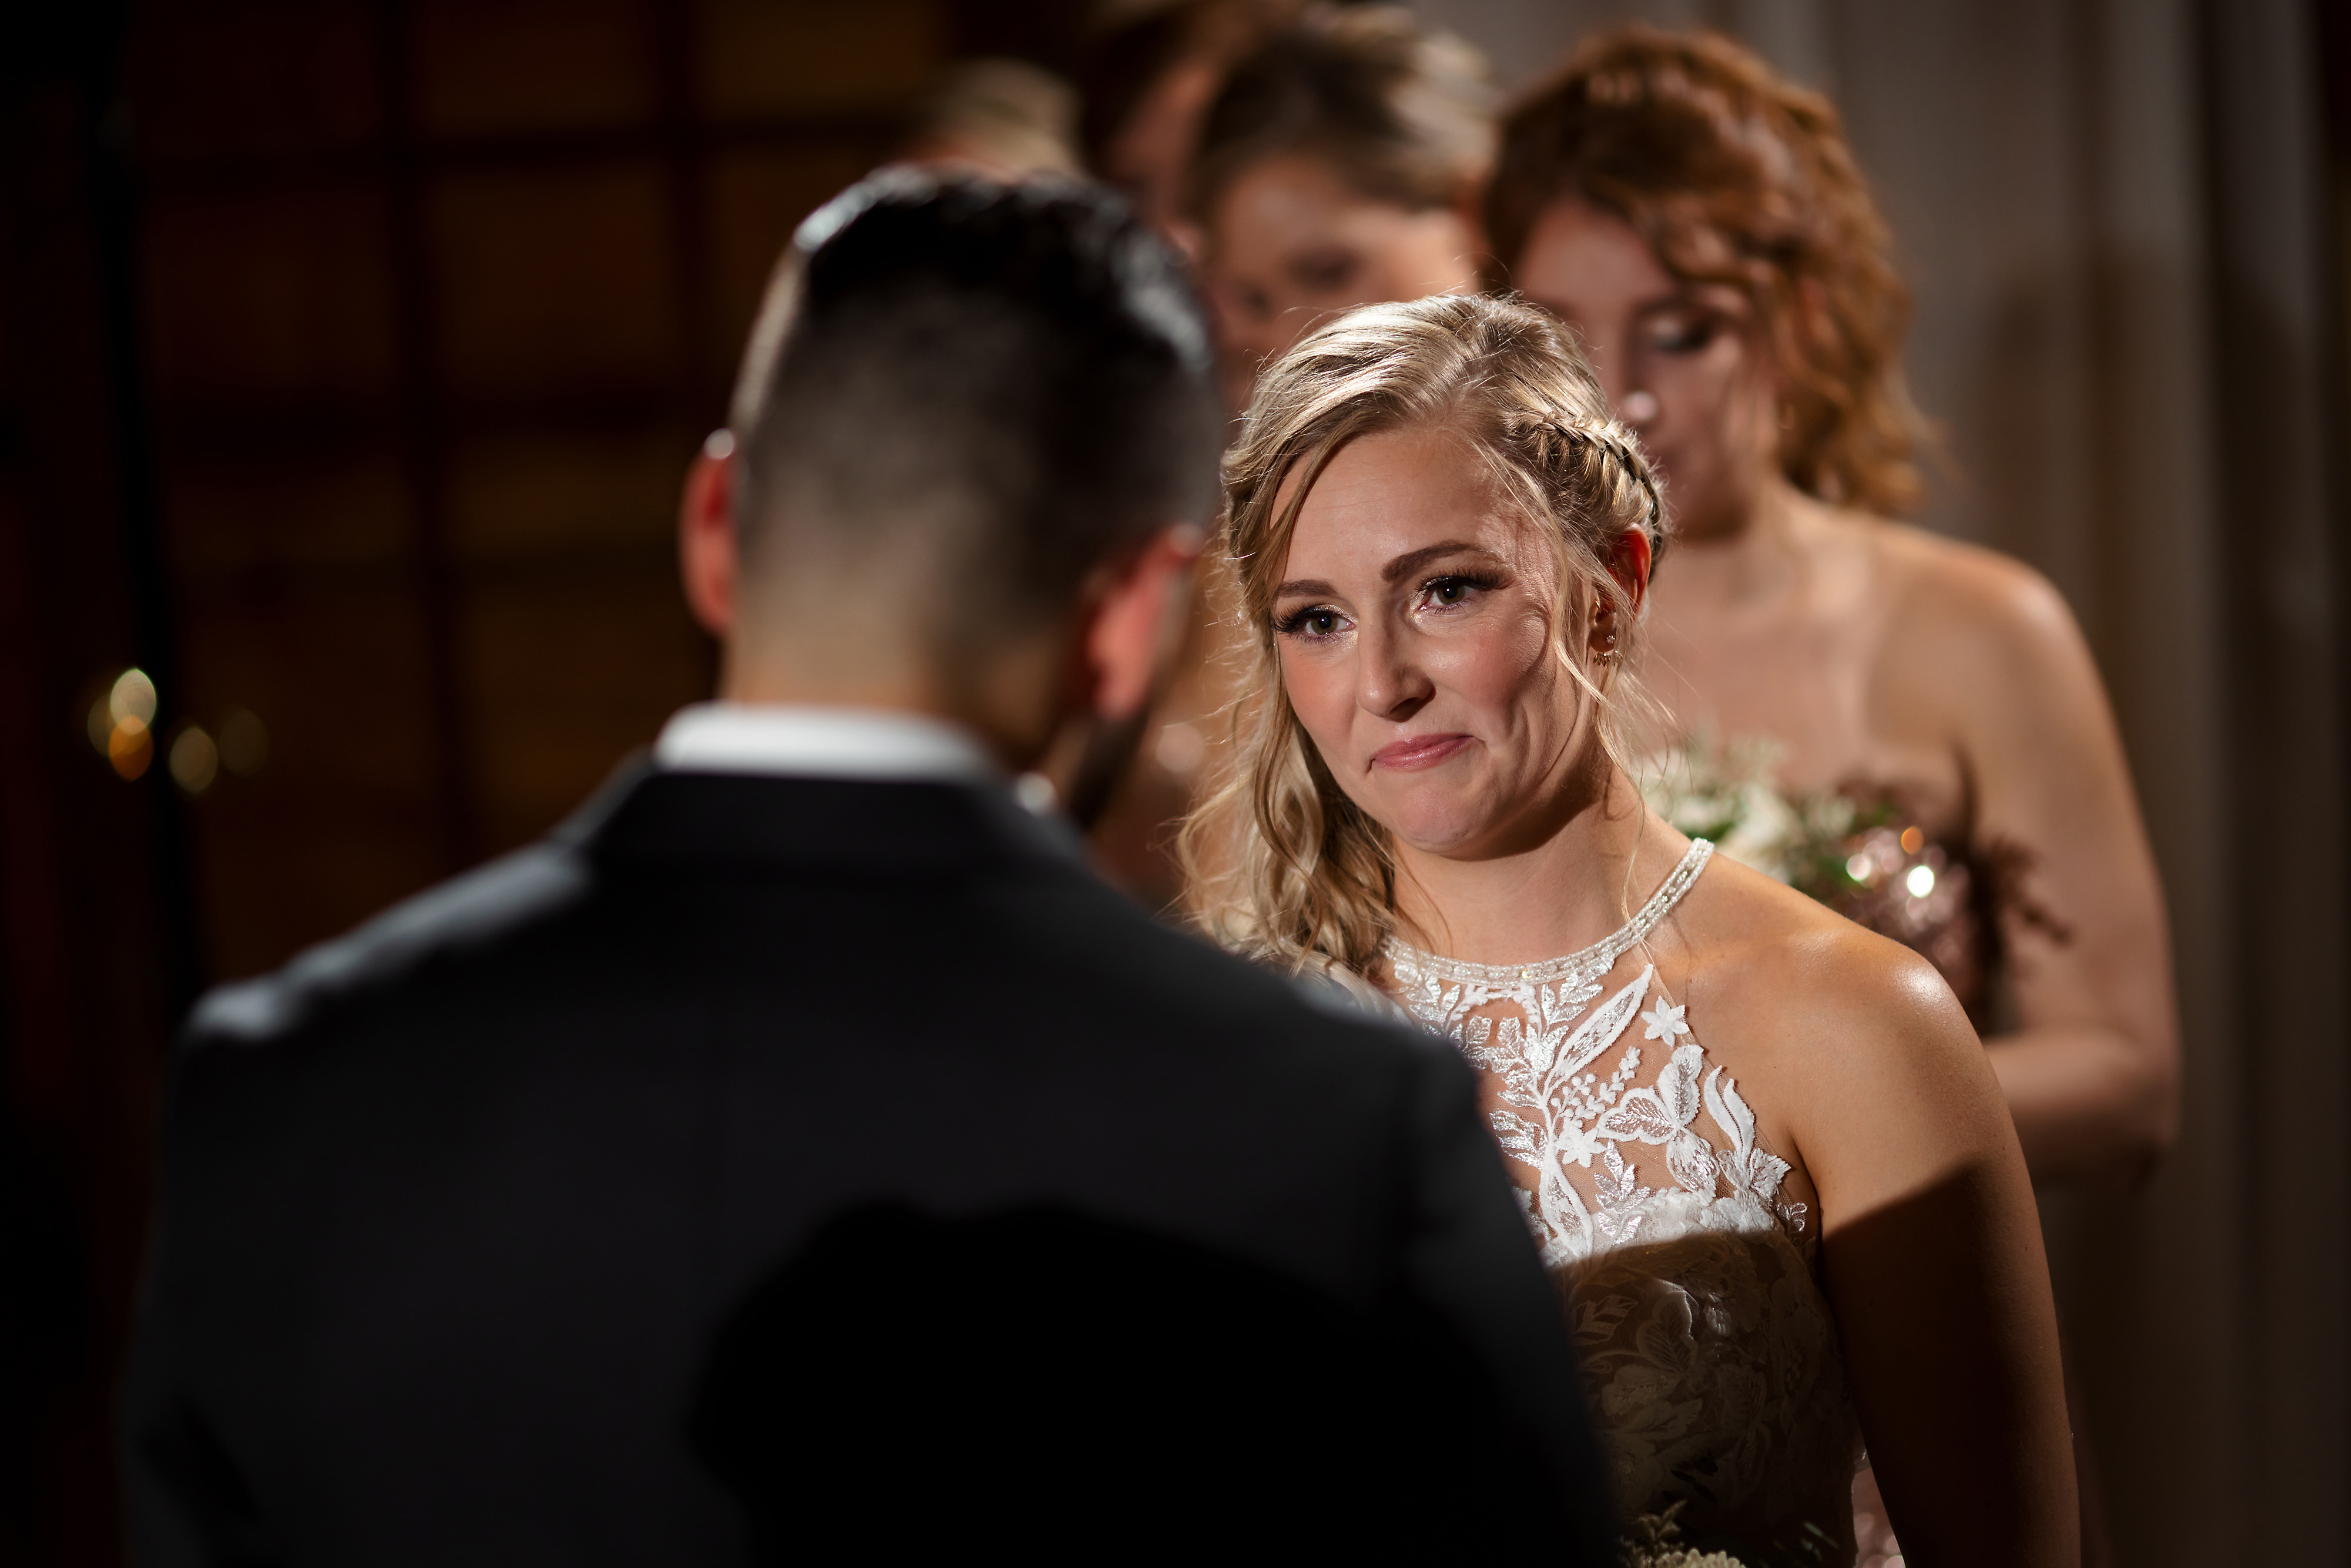 Bride looks at groom during wedding ceremony at Two Brothers Brewing in Aurora, Illinois